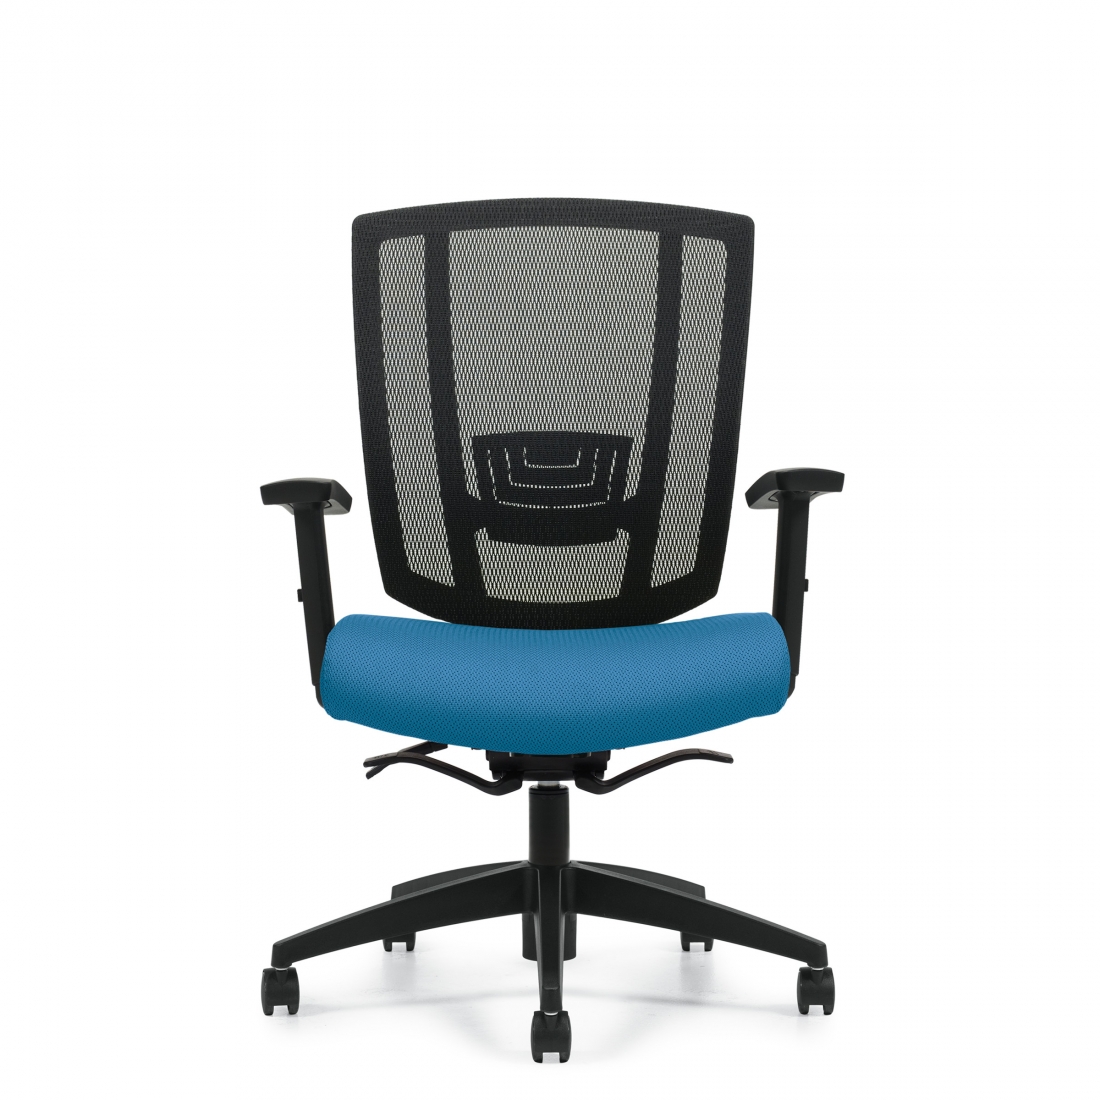 Avro | Upholstered Seat & Mesh Back Weight Sensing Synchro Chair